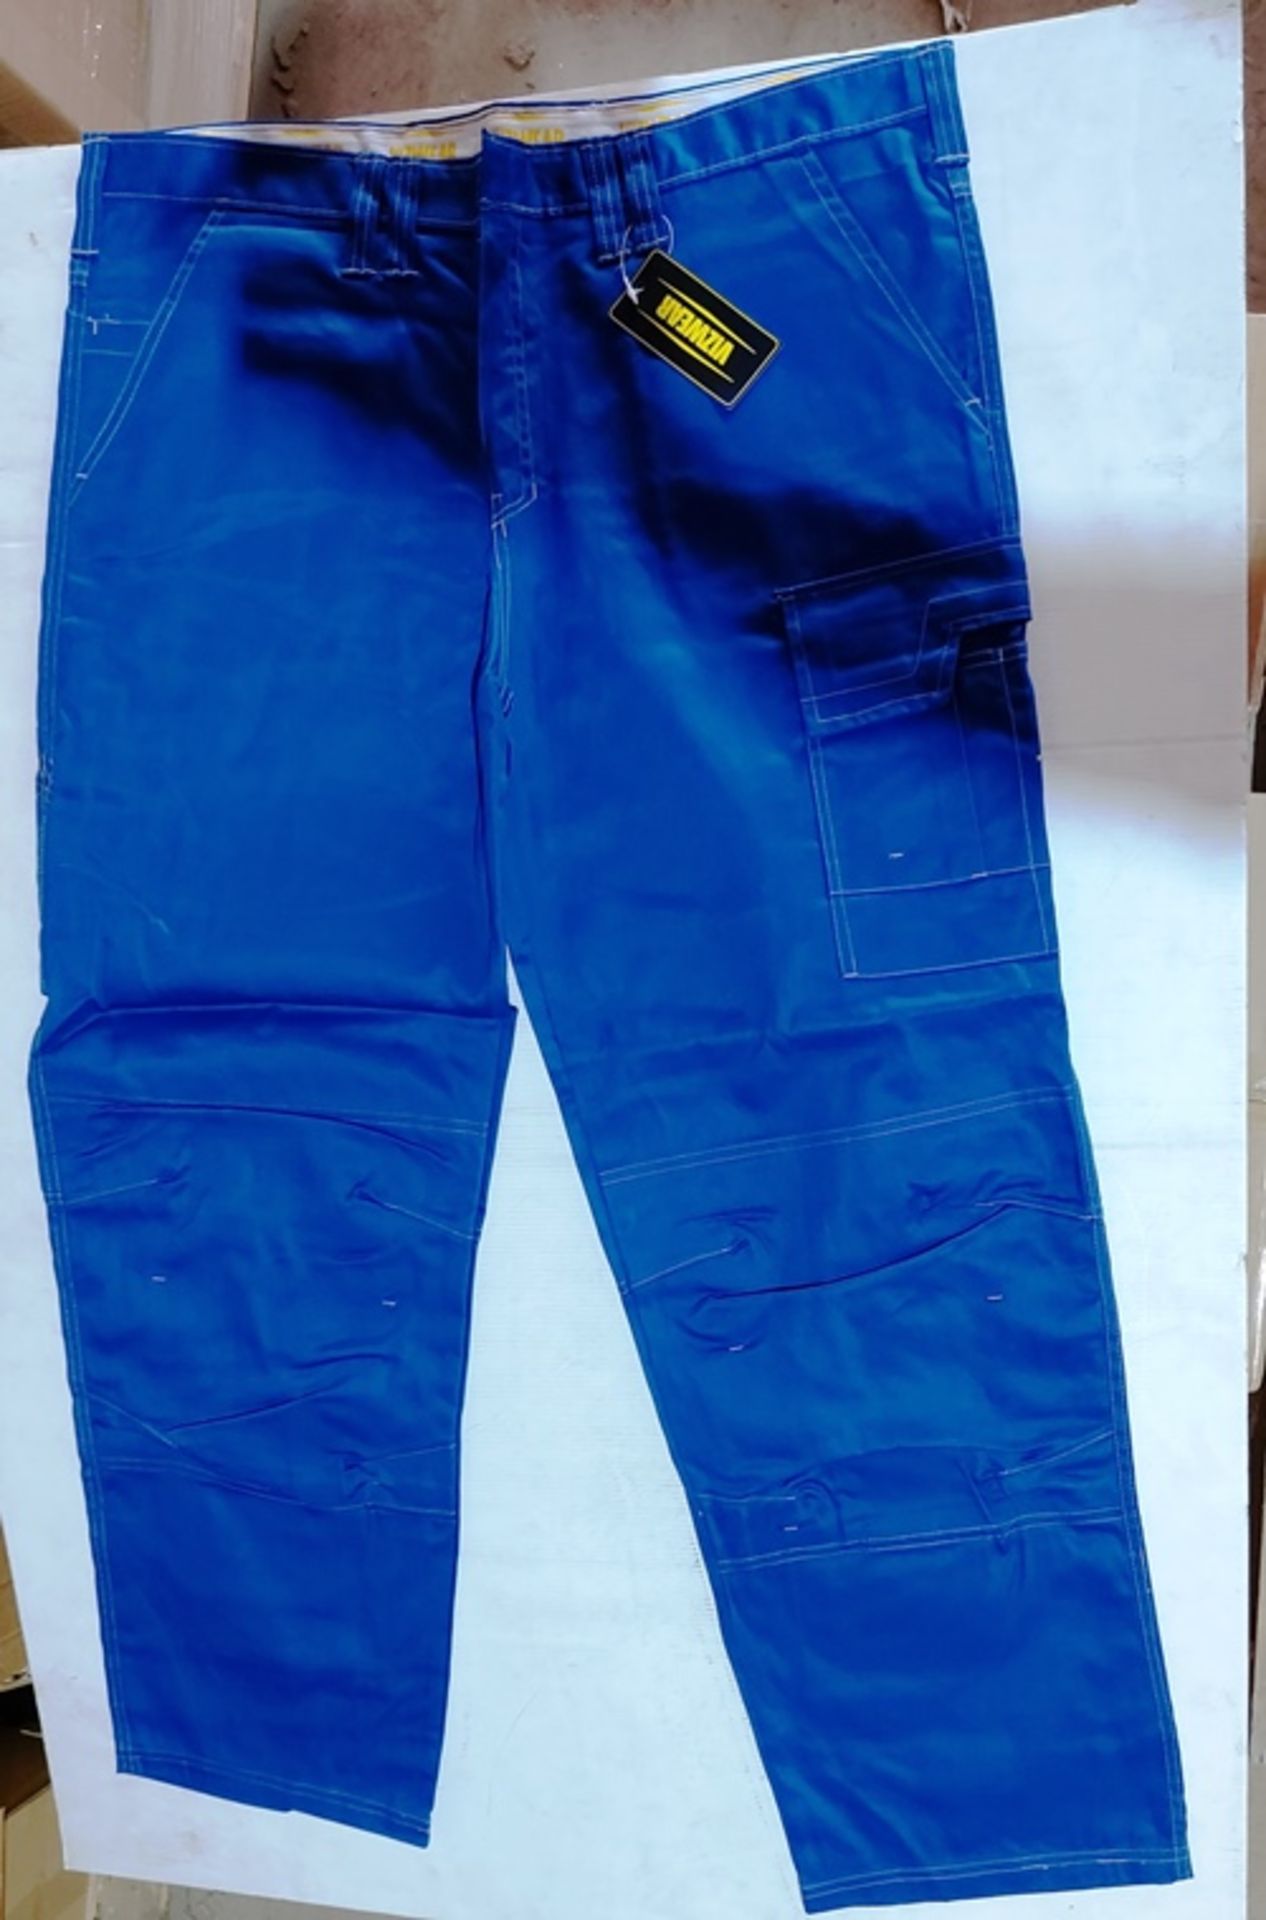 10 x Navy Action line trousers workwear trousers size 34 regular new in original packaging - Image 2 of 2